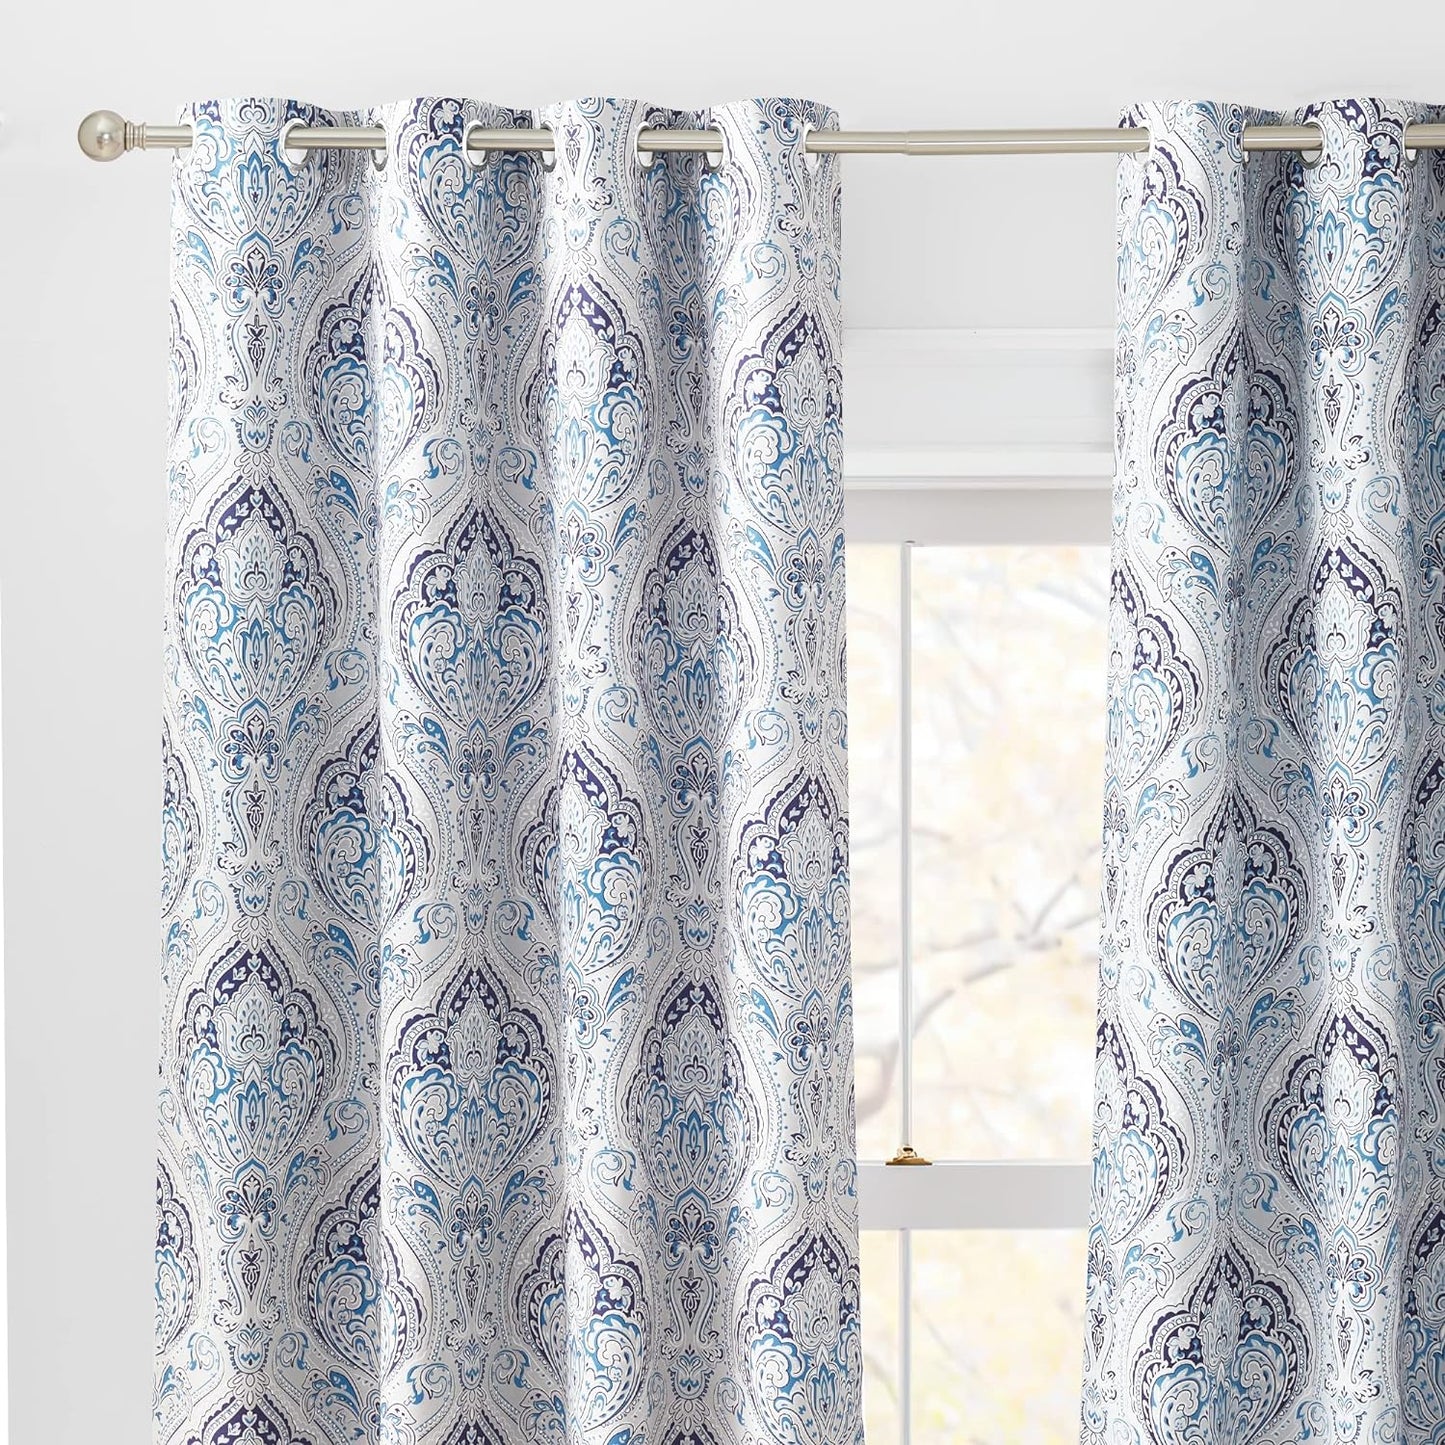 KGORGE Blackout Curtains & Drapes Boho Home/Office Artistic Decor with Vivid Watercolor Floral Painting Thermal Insulated Energy Efficient Shades for Bedroom Living Room (Blue, W 52" X L 84", 1 Pair)  KGORGE 1.Blue Grotto W 52 X L 63 